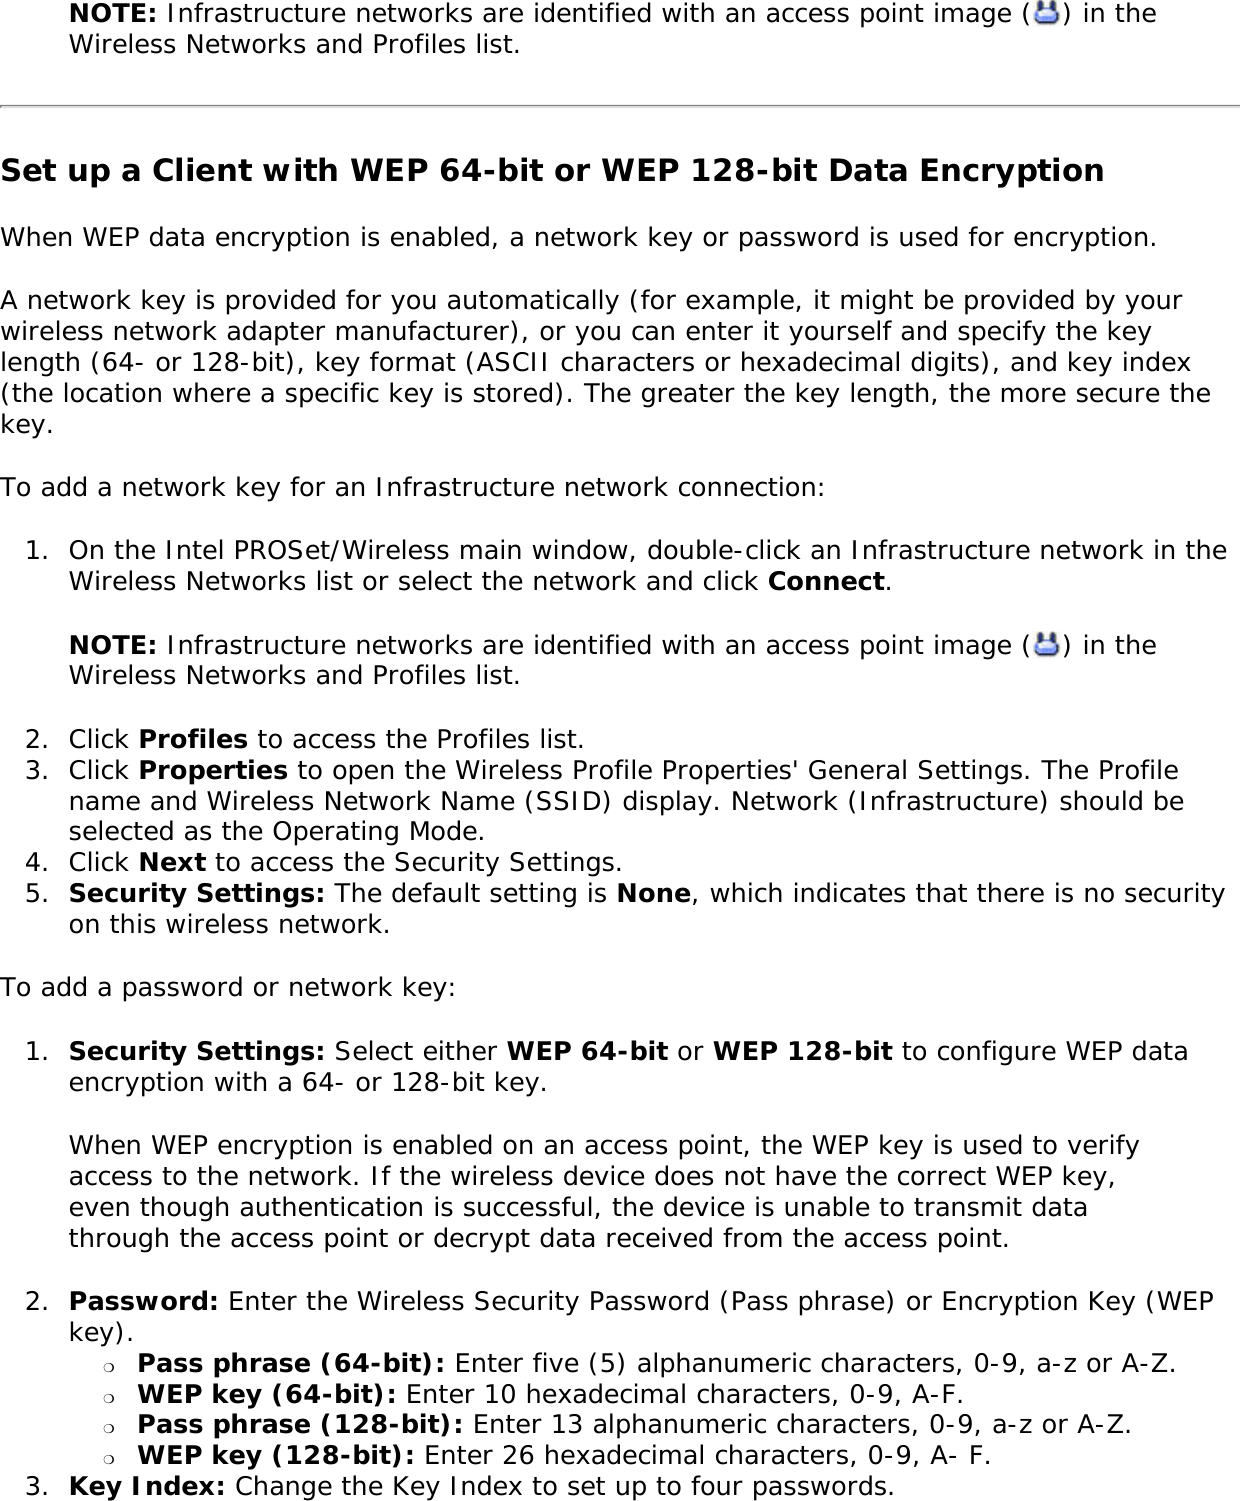 NOTE: Infrastructure networks are identified with an access point image ( ) in the Wireless Networks and Profiles list. Set up a Client with WEP 64-bit or WEP 128-bit Data EncryptionWhen WEP data encryption is enabled, a network key or password is used for encryption. A network key is provided for you automatically (for example, it might be provided by your wireless network adapter manufacturer), or you can enter it yourself and specify the key length (64- or 128-bit), key format (ASCII characters or hexadecimal digits), and key index (the location where a specific key is stored). The greater the key length, the more secure the key. To add a network key for an Infrastructure network connection: 1.  On the Intel PROSet/Wireless main window, double-click an Infrastructure network in the Wireless Networks list or select the network and click Connect.NOTE: Infrastructure networks are identified with an access point image ( ) in the Wireless Networks and Profiles list. 2.  Click Profiles to access the Profiles list.3.  Click Properties to open the Wireless Profile Properties&apos; General Settings. The Profile name and Wireless Network Name (SSID) display. Network (Infrastructure) should be selected as the Operating Mode.4.  Click Next to access the Security Settings.5.  Security Settings: The default setting is None, which indicates that there is no security on this wireless network.To add a password or network key: 1.  Security Settings: Select either WEP 64-bit or WEP 128-bit to configure WEP data encryption with a 64- or 128-bit key.When WEP encryption is enabled on an access point, the WEP key is used to verify access to the network. If the wireless device does not have the correct WEP key, even though authentication is successful, the device is unable to transmit data through the access point or decrypt data received from the access point. 2.  Password: Enter the Wireless Security Password (Pass phrase) or Encryption Key (WEP key). ❍     Pass phrase (64-bit): Enter five (5) alphanumeric characters, 0-9, a-z or A-Z. ❍     WEP key (64-bit): Enter 10 hexadecimal characters, 0-9, A-F.❍     Pass phrase (128-bit): Enter 13 alphanumeric characters, 0-9, a-z or A-Z. ❍     WEP key (128-bit): Enter 26 hexadecimal characters, 0-9, A- F.3.  Key Index: Change the Key Index to set up to four passwords.